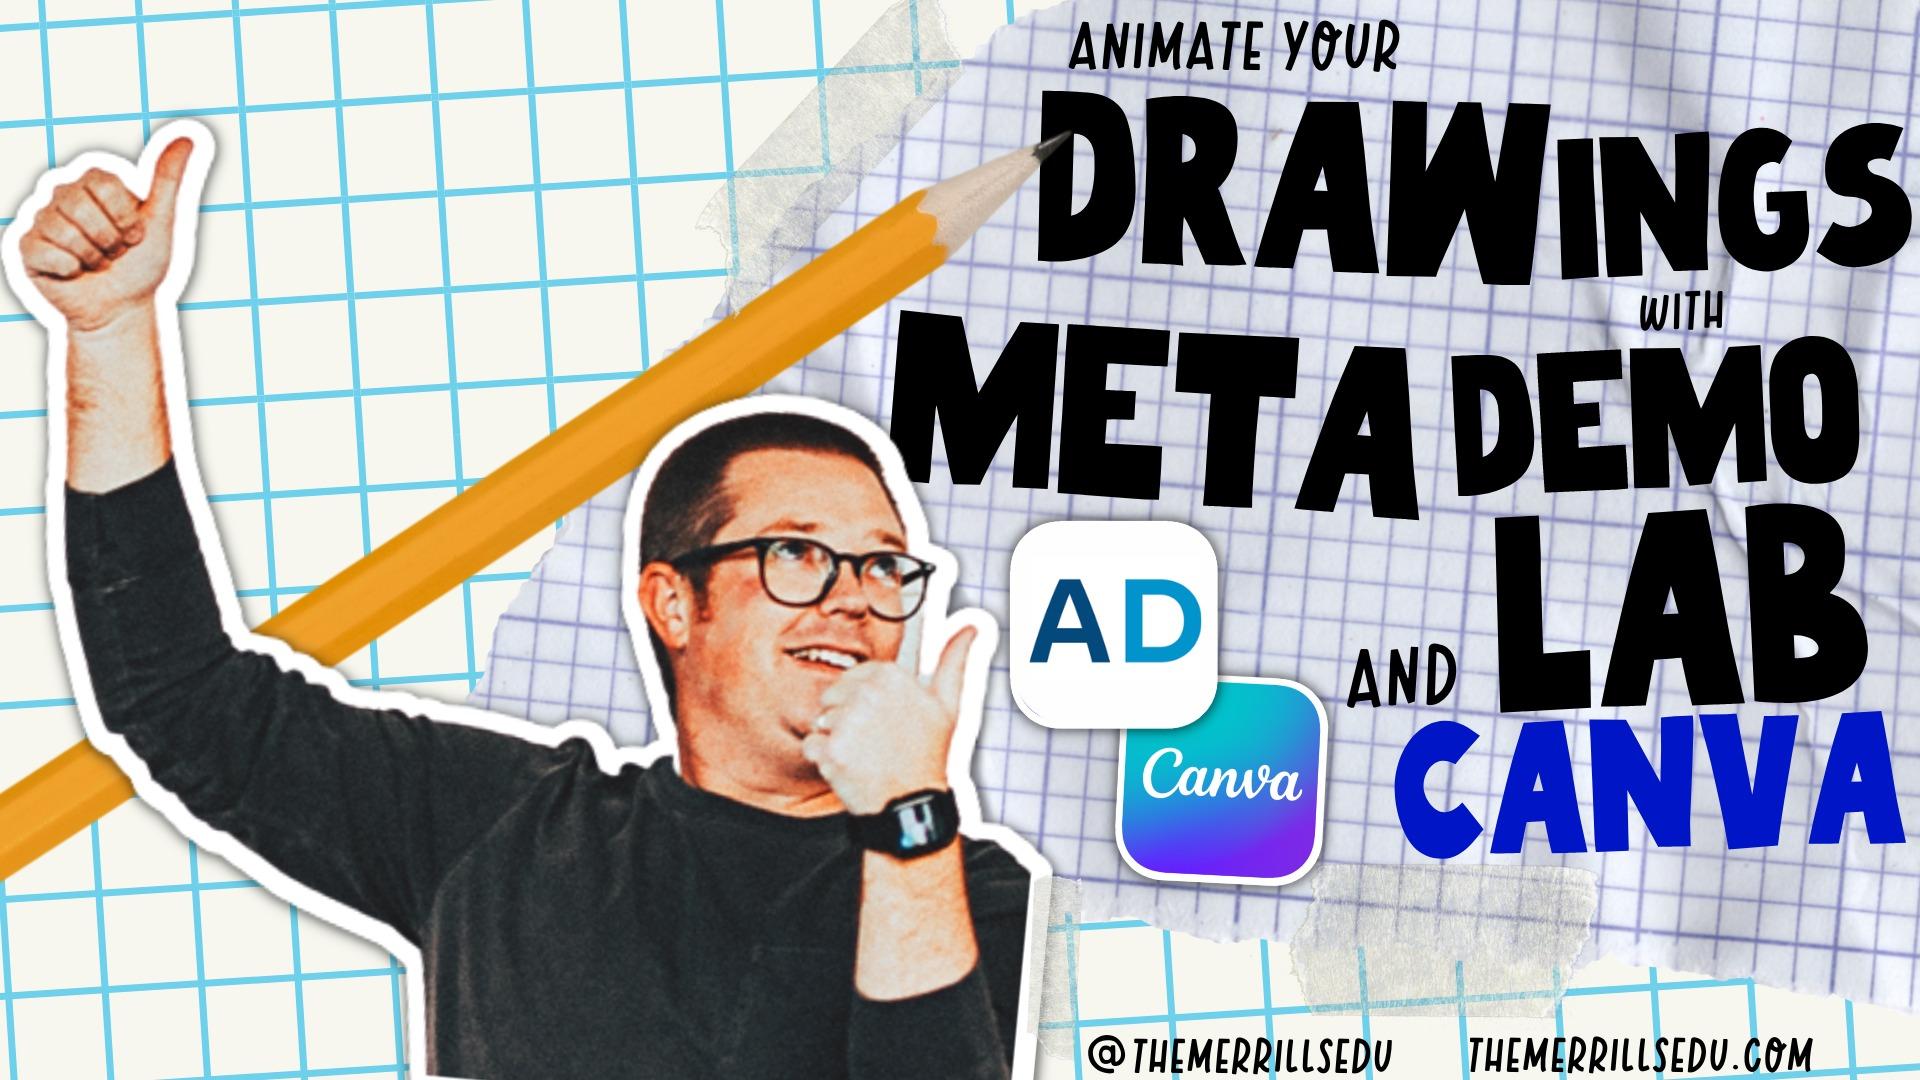 How to Animate Your Drawings with Metademolab and Canva